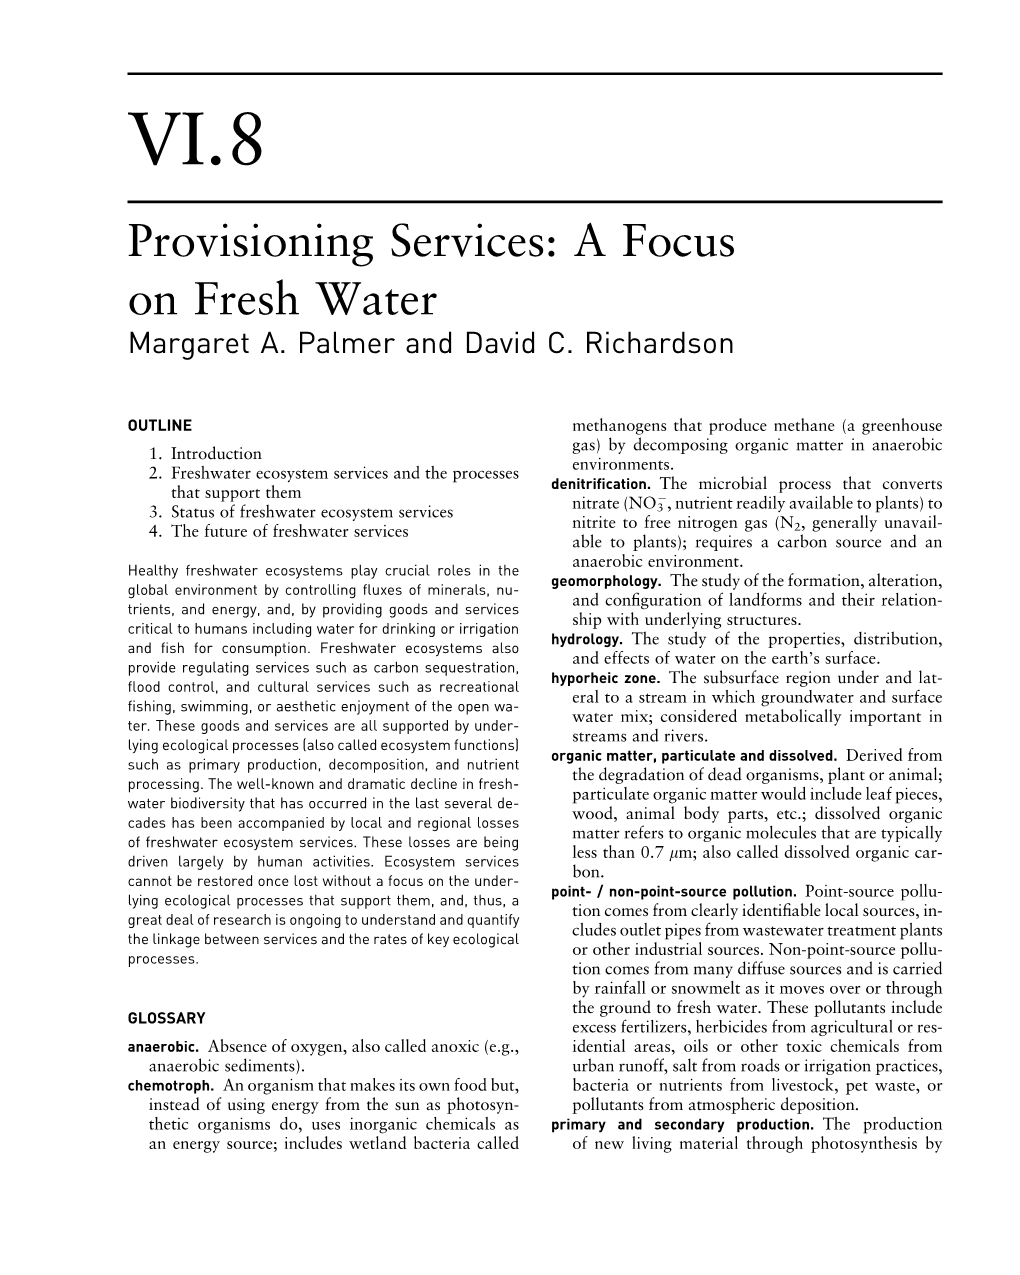 VI.8 Provisioning Services: a Focus on Fresh Water Margaret A